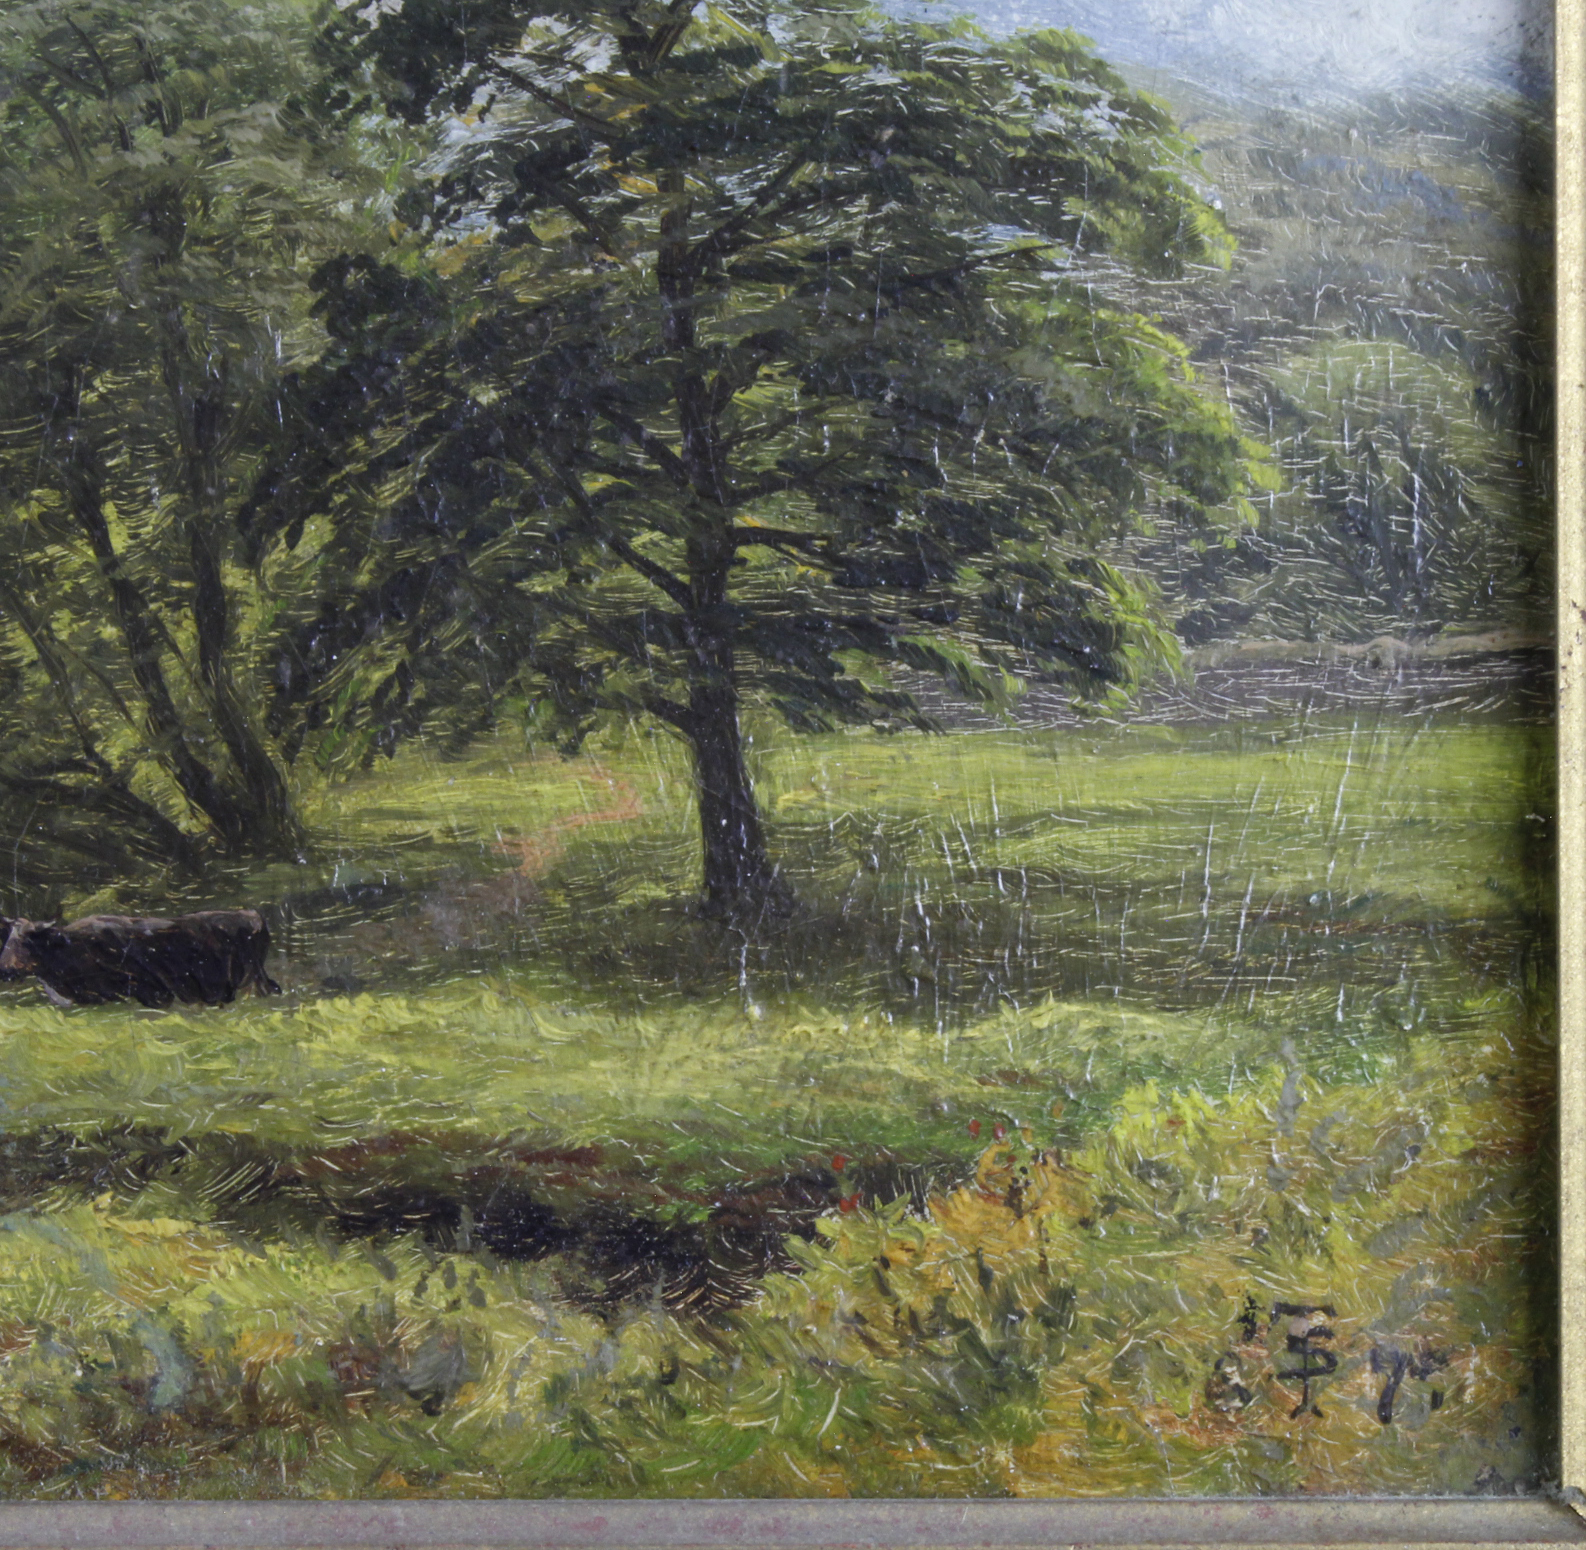 Spinks, Thomas (British) Oil on canvas. Cattle watering by a river. Signed with monogram (TS) - Image 2 of 2